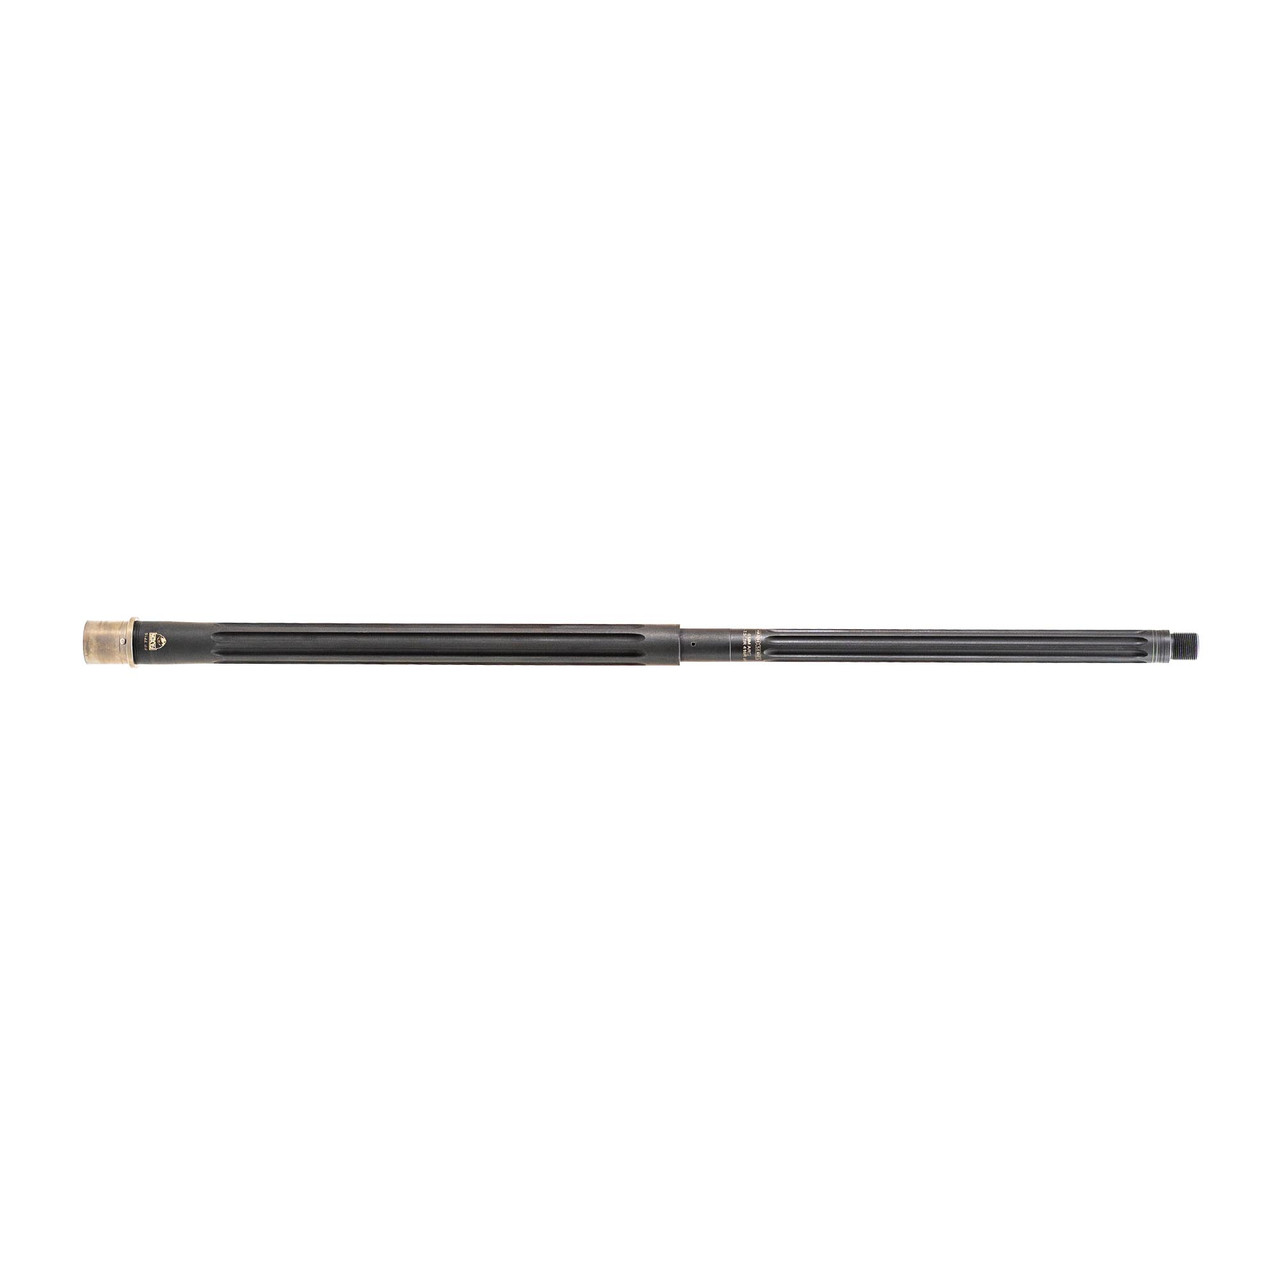 Faxon Match Series 24, Heavy Fluted, 6mm ARC, Rifle-Length, 416R